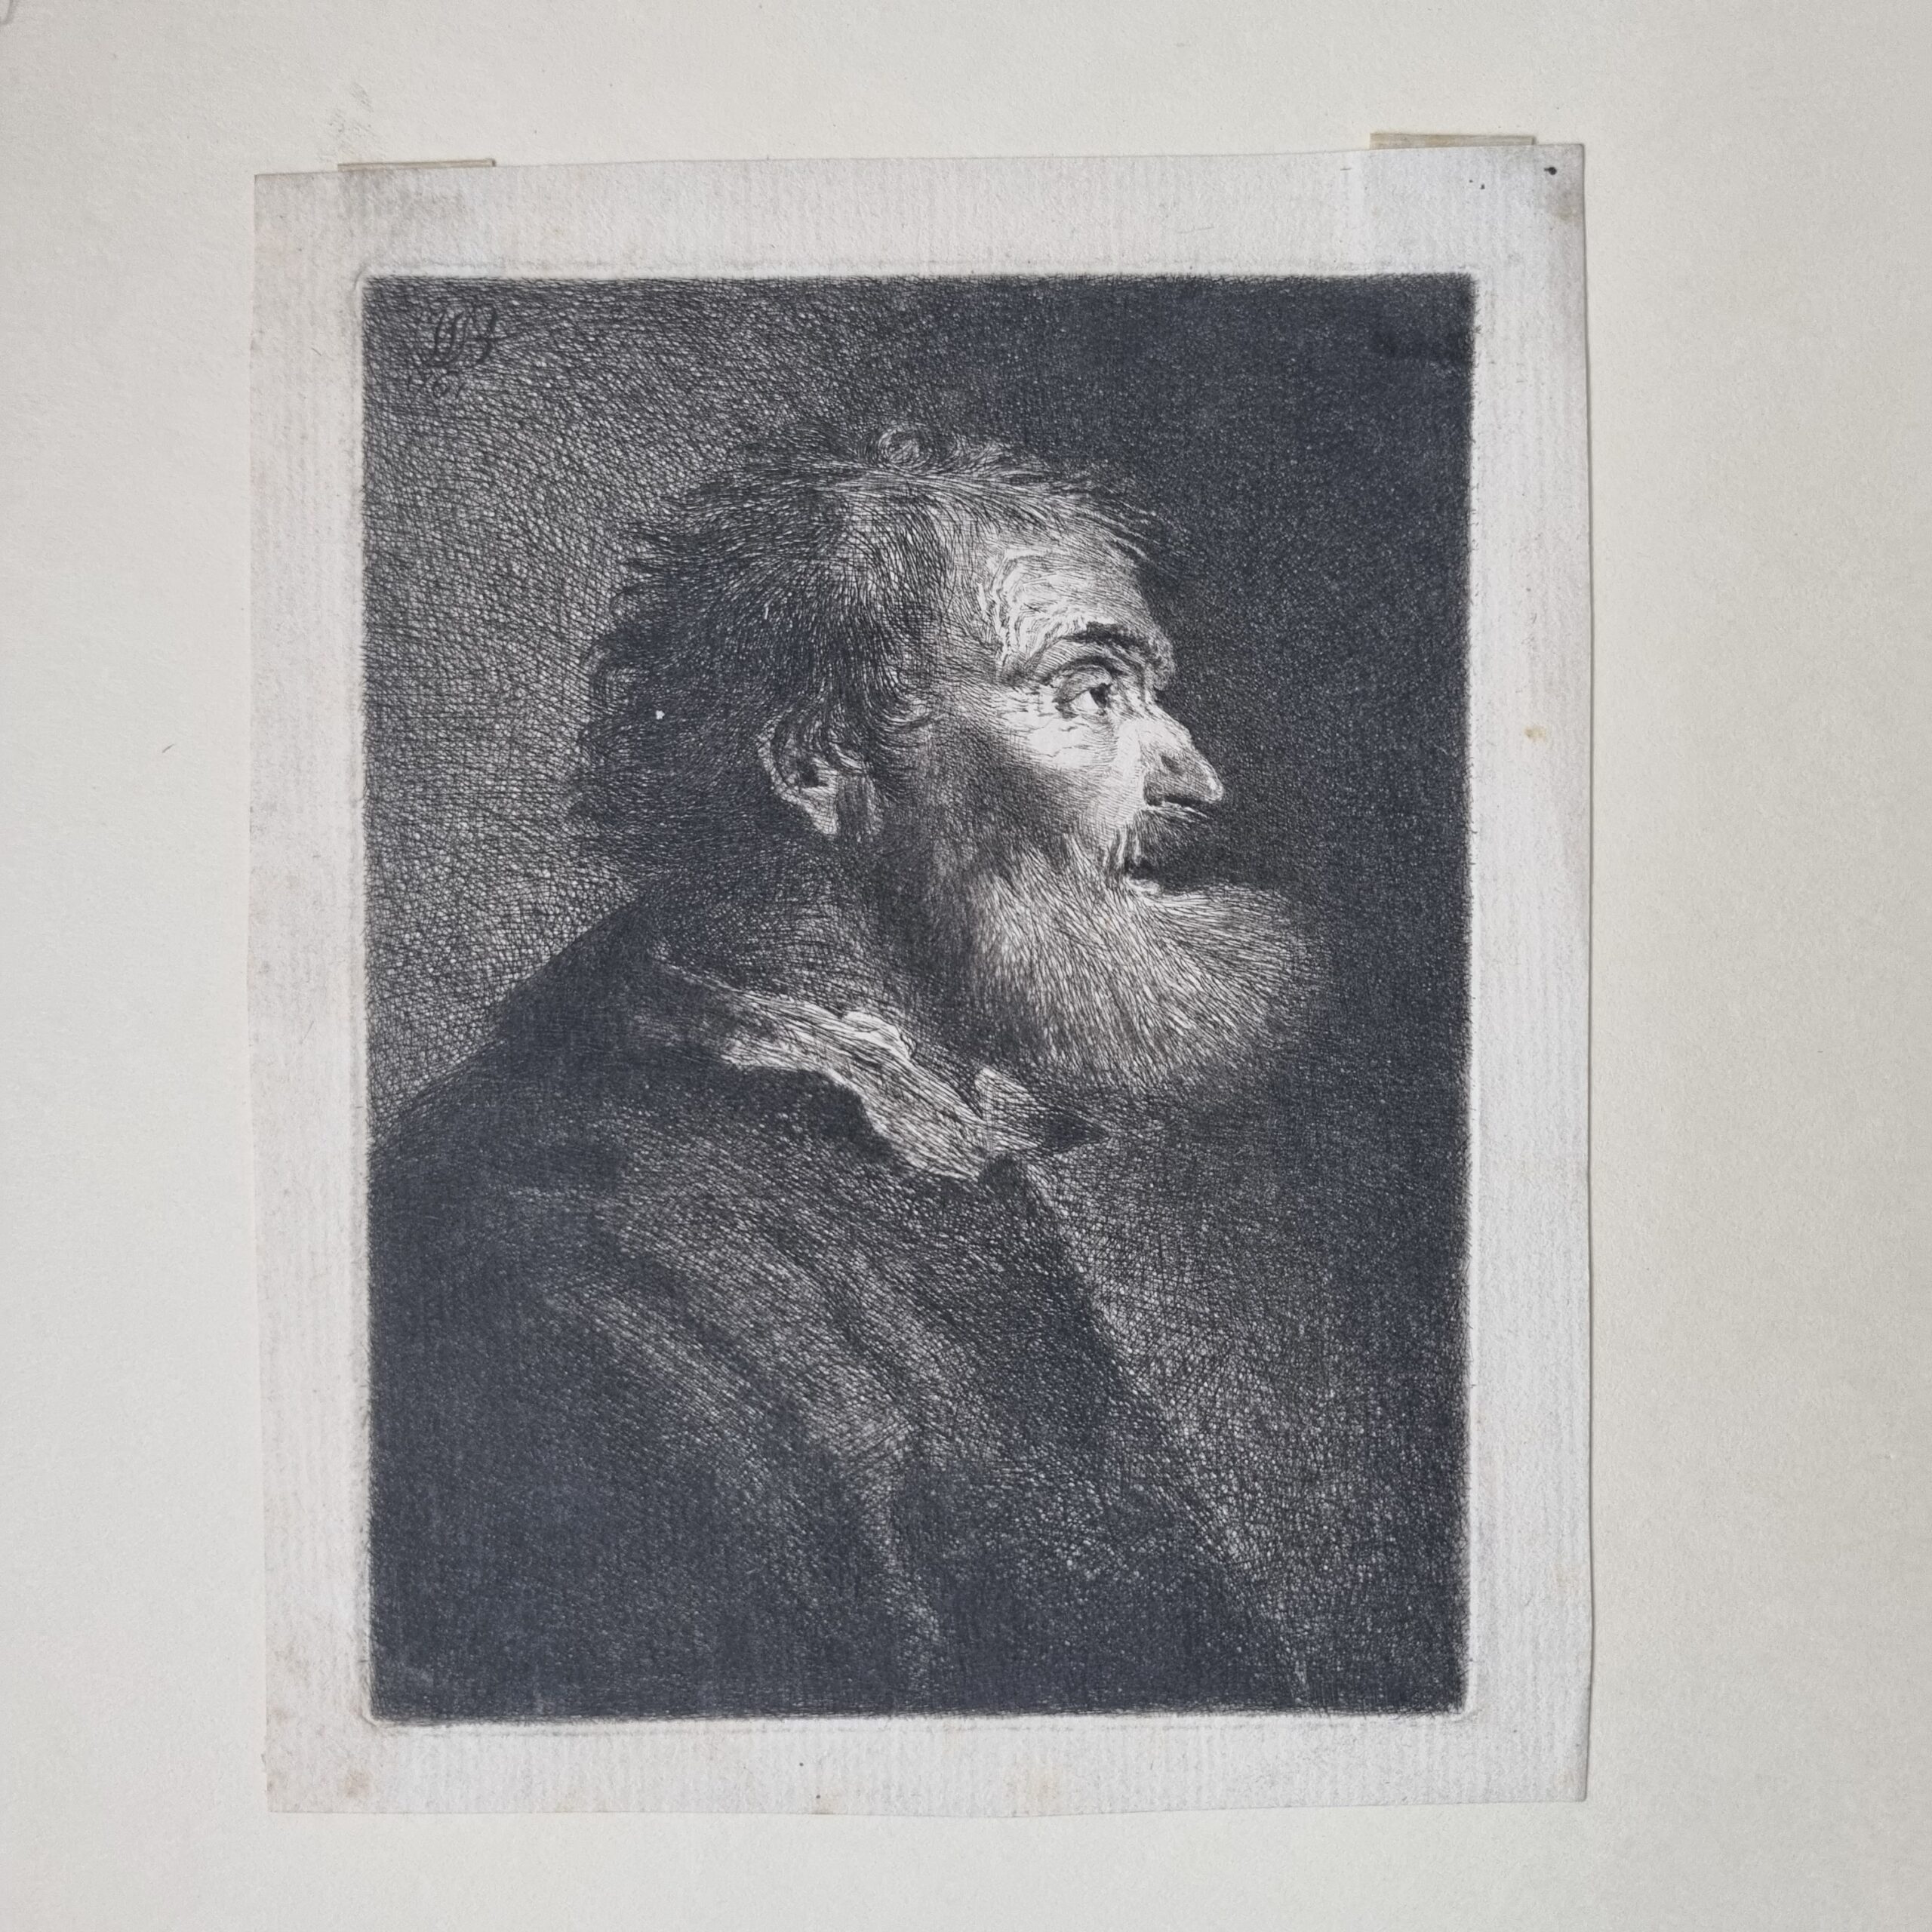 [Antique print, etching and dry point] Old man in profile, published 1761.